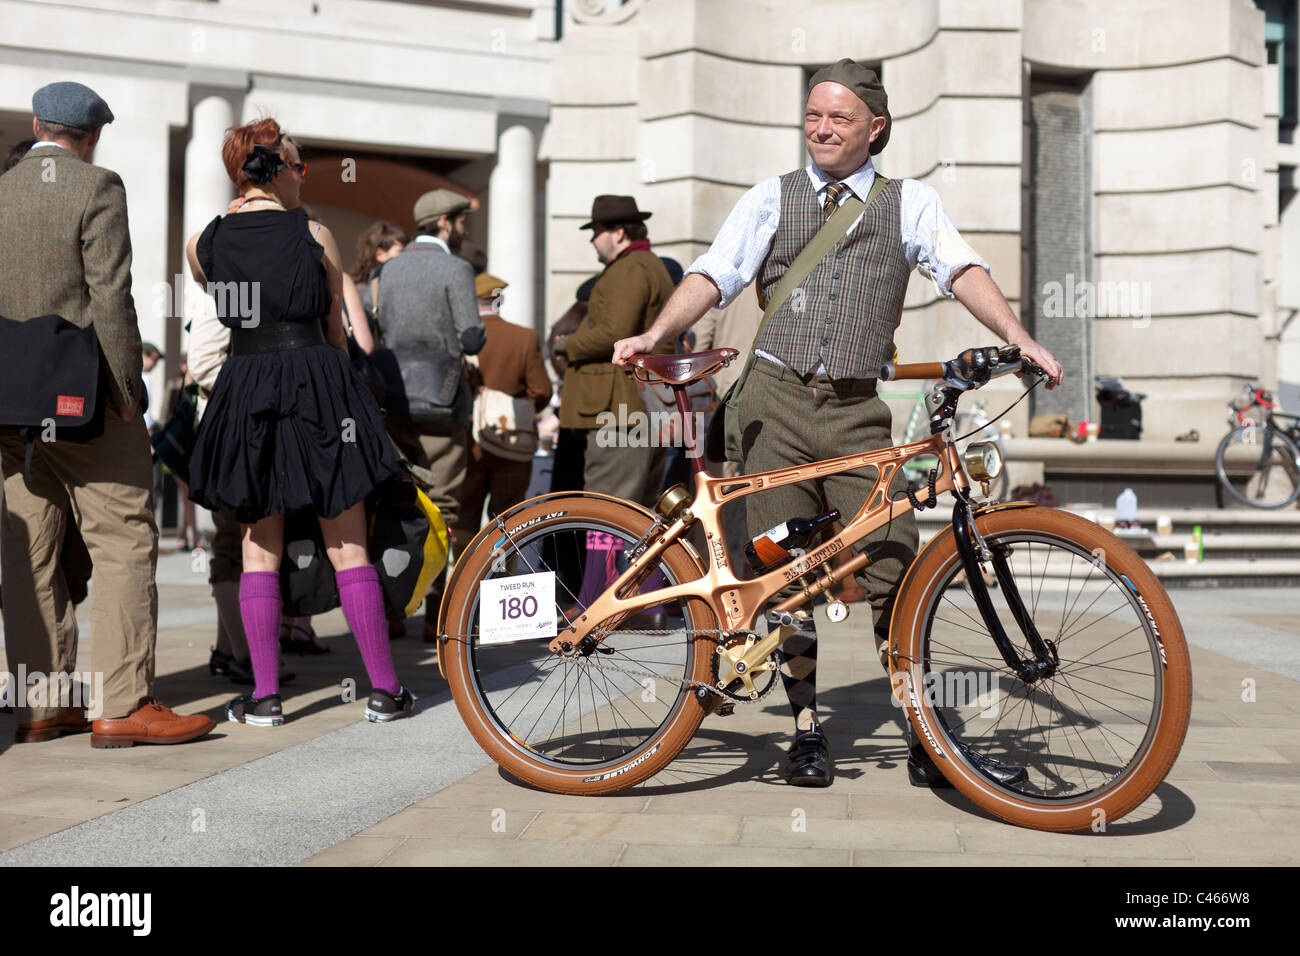 The Tweed Run, London, UK, 11th April 2011: participants gather in Paternoster Square   Photo by Mike Goldwater Stock Photo